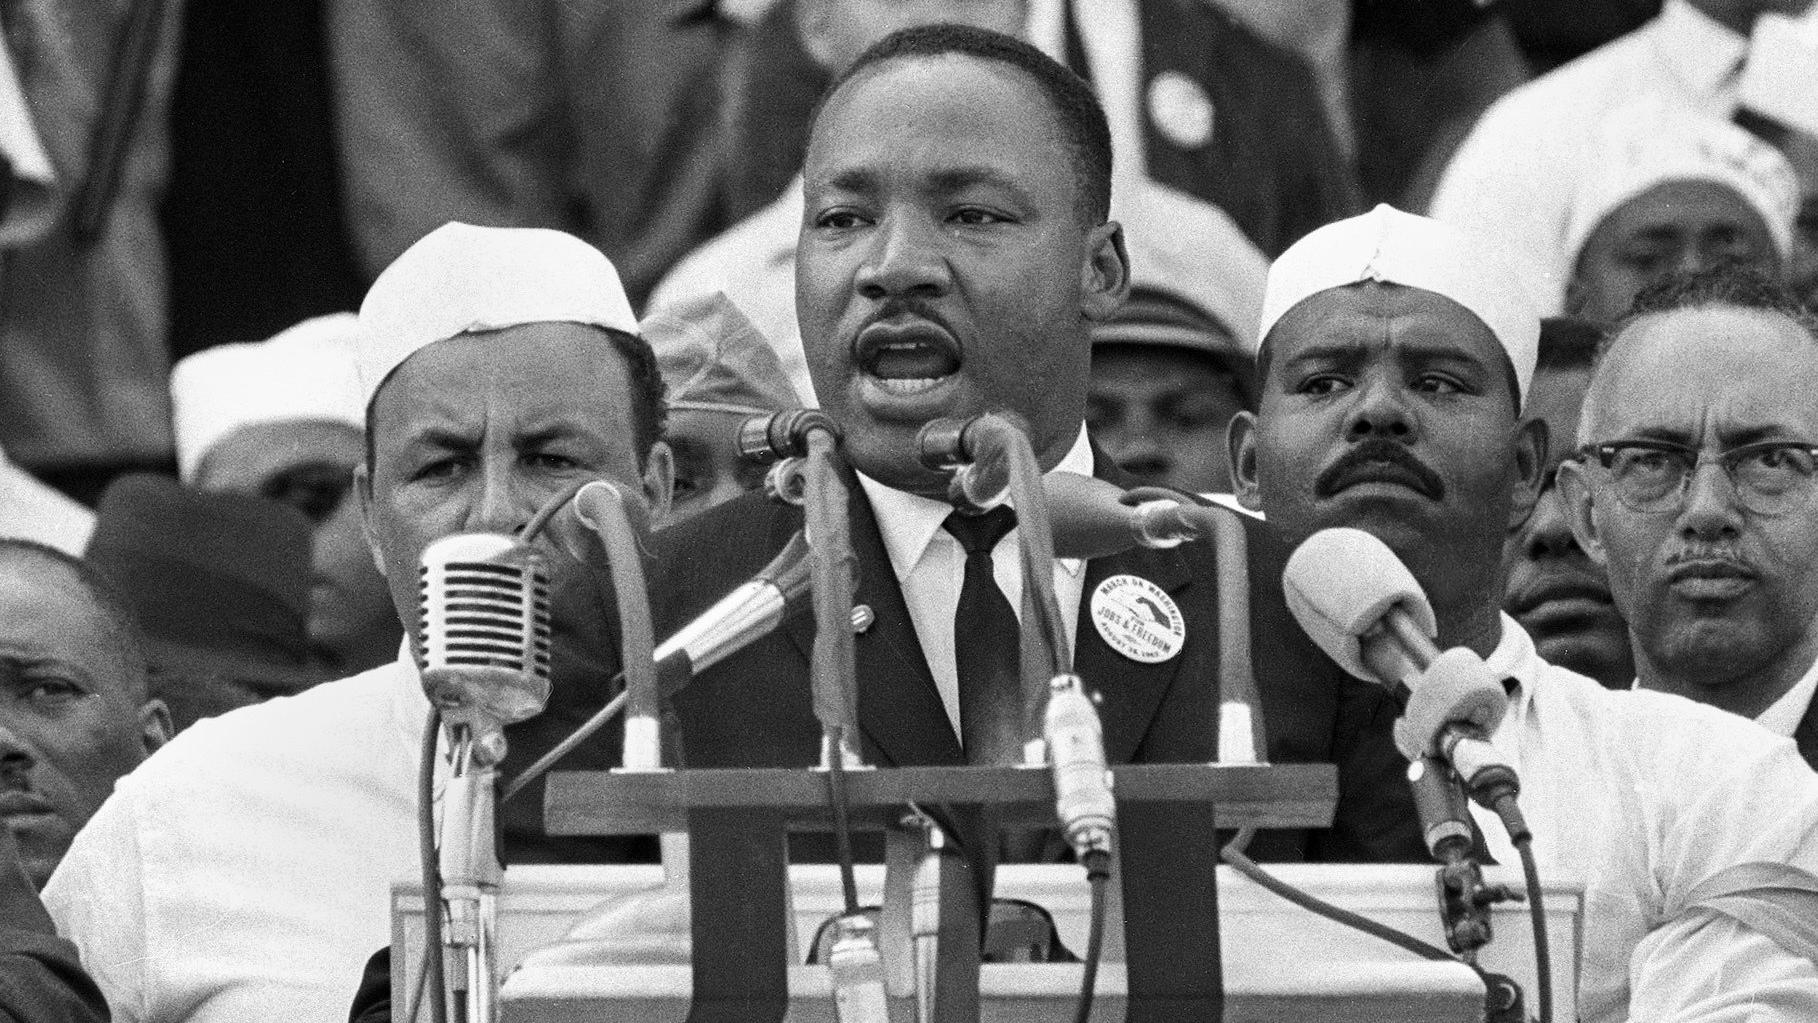 FILE - In this Aug. 28, 1963 file photo, Dr. Martin Luther King Jr., head of the Southern Christian Leadership Conference, addresses marchers during his "I Have a Dream" speech at the Lincoln Memorial in Washington. The annual celebration of the Mart